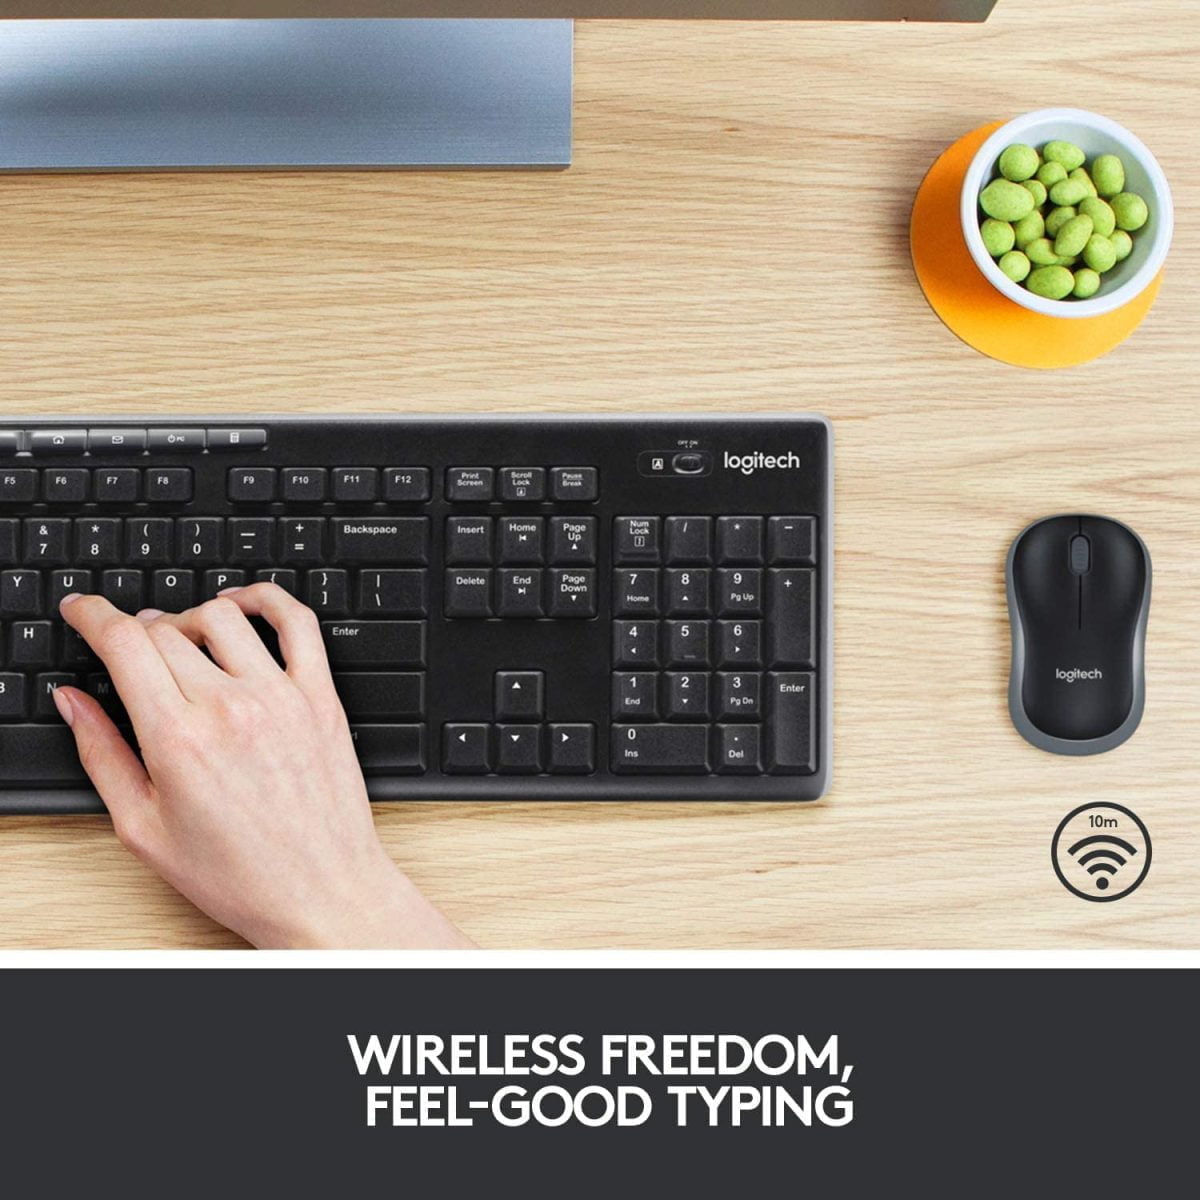 71Pwkogeycl. Ac Sl1500 لوجيتك Https://Www.youtube.com/Watch?V=Hhwya1Rlfts 4 Ghz Wireless Connection: A Tiny Logitech Unifying Receiver Connects Both The Keyboard And Mouse Using Just One Usb Port
Long Battery Life: Get Up To 24 Months Of Keyboard Power And 12 Months Of Mouse Power Without Changing Batteries (Keyboard And Mouse Battery Life May Vary Based On User And Computing Conditions)
No Software Installation Required لوجيتك – كومبو لاسلكي Mk270 مع لوحة مفاتيح وماوس – أسود